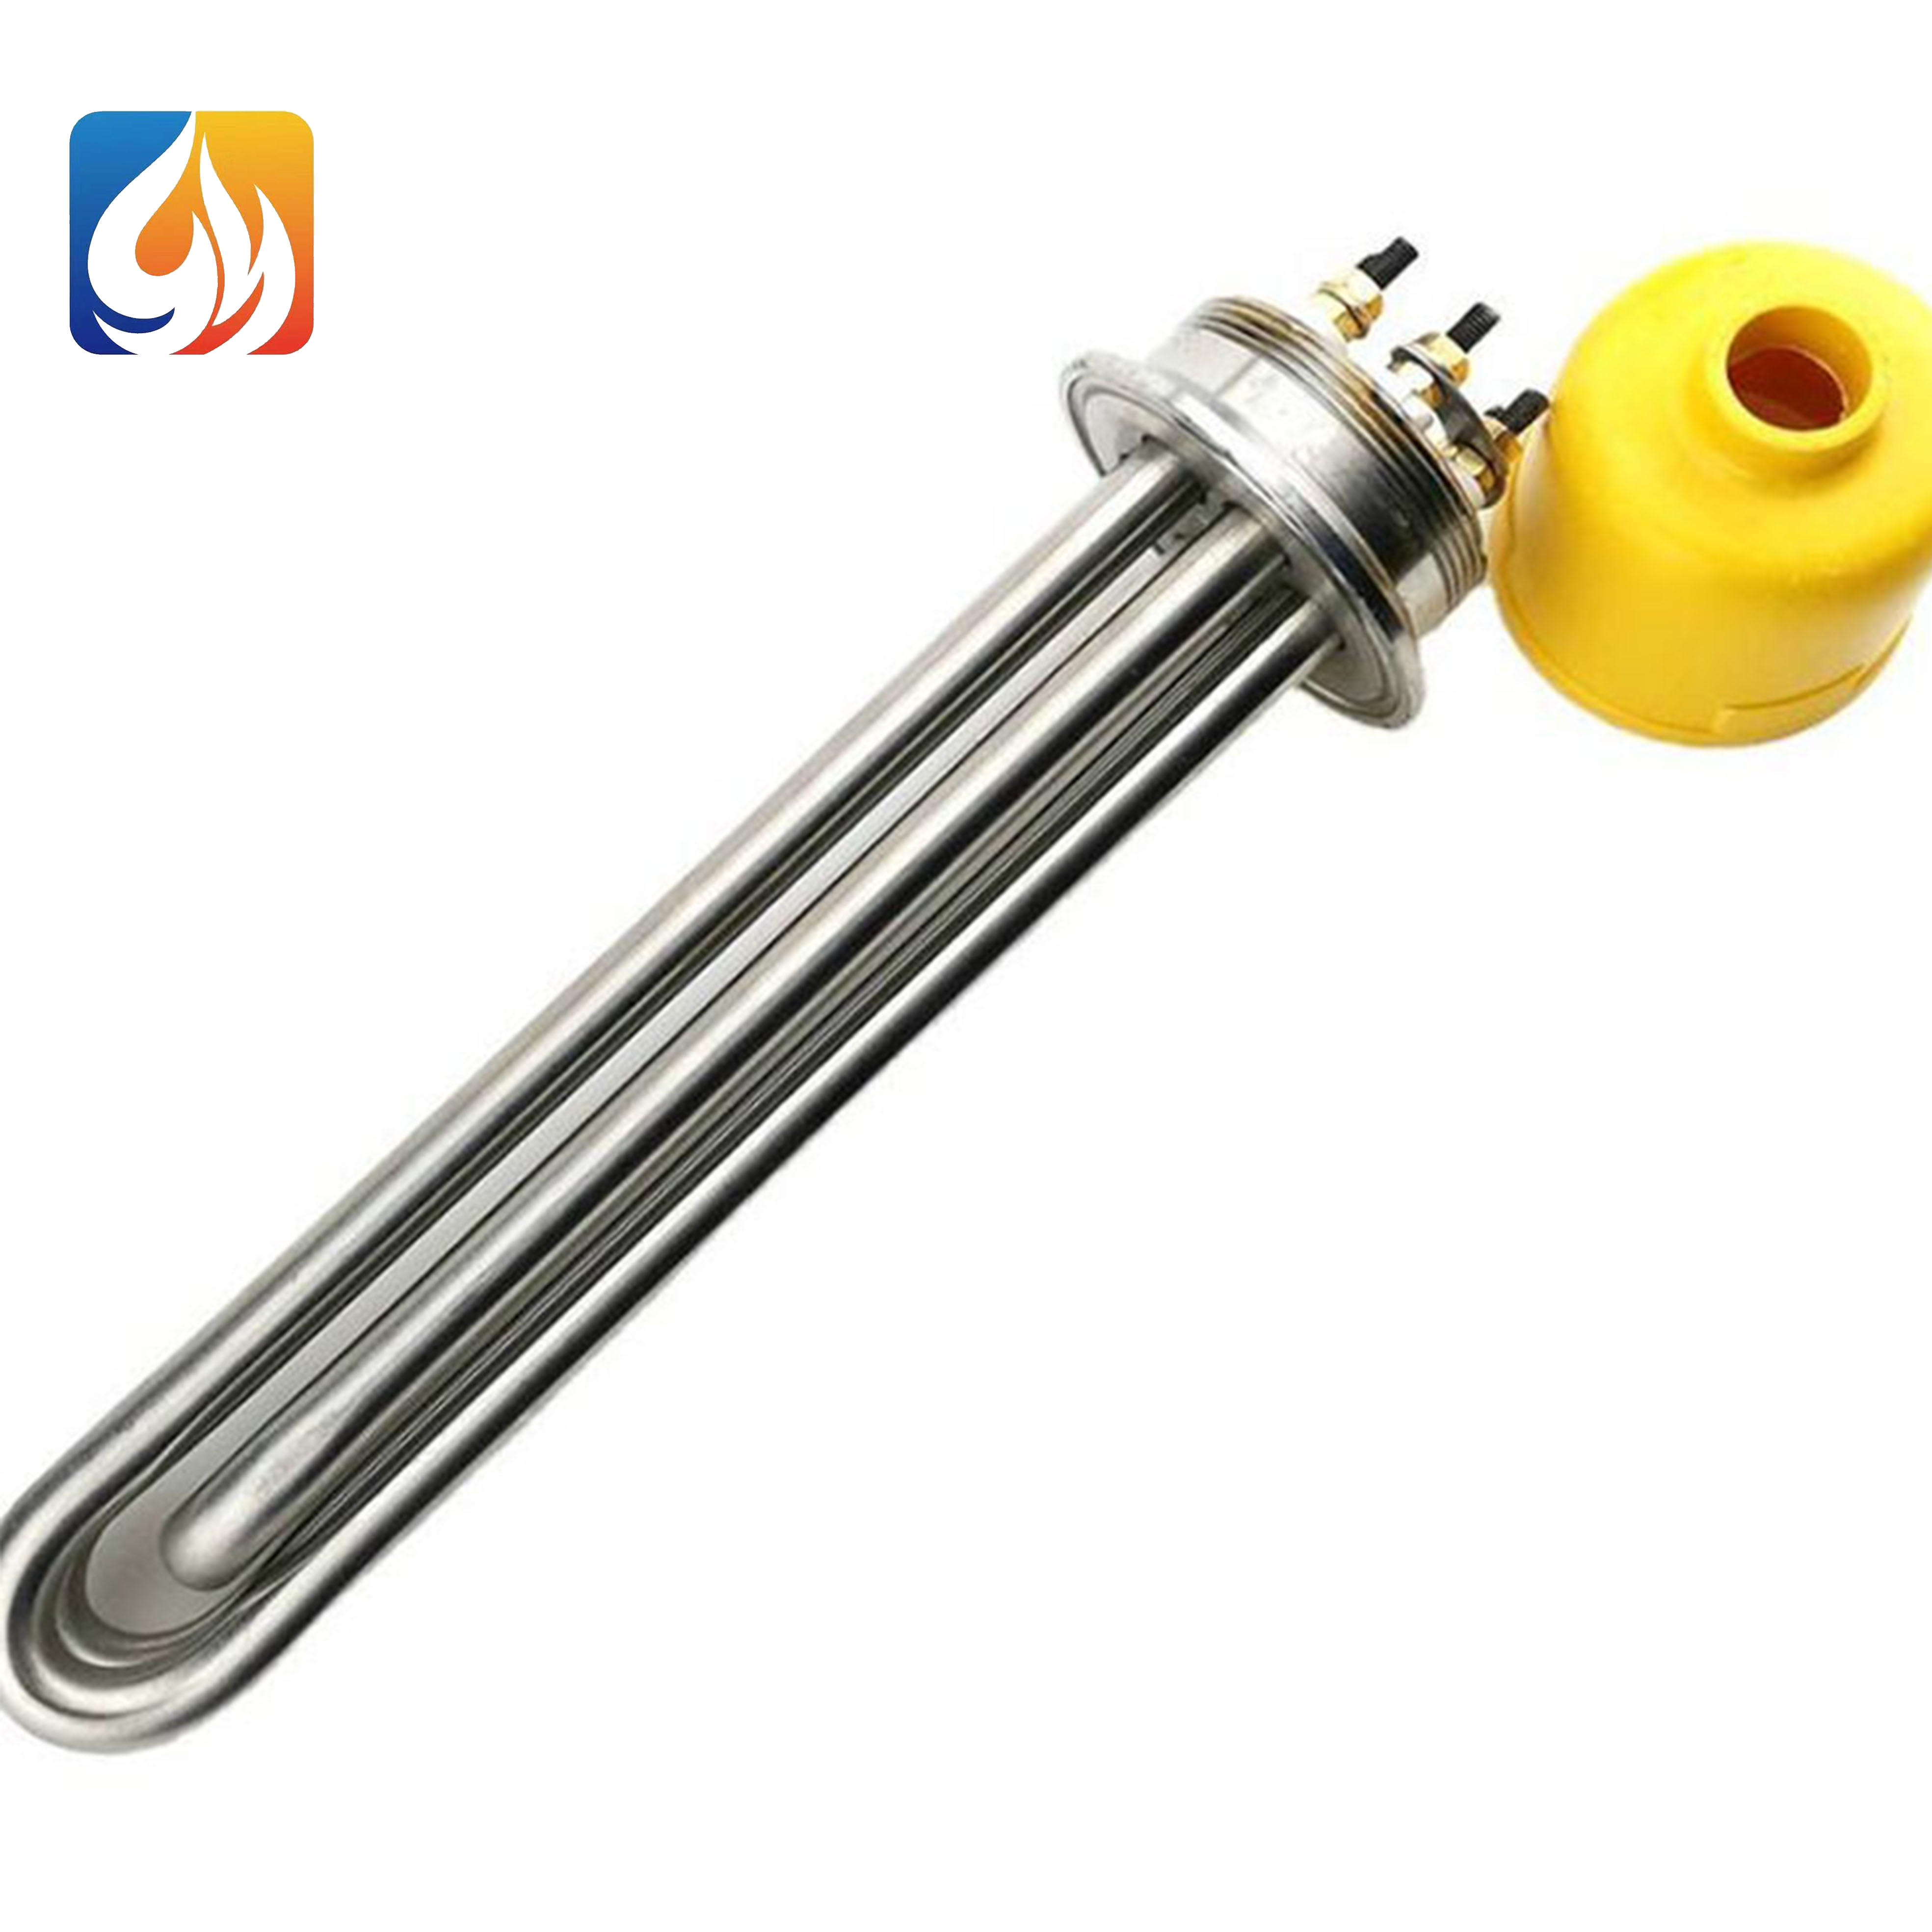 3KW 6KW 9KW Electric Tubular Heater With 1-1/4″ 1-1/2″ 2″ Tri Clamp Thread Water Tank Immersion Heater Featured Image